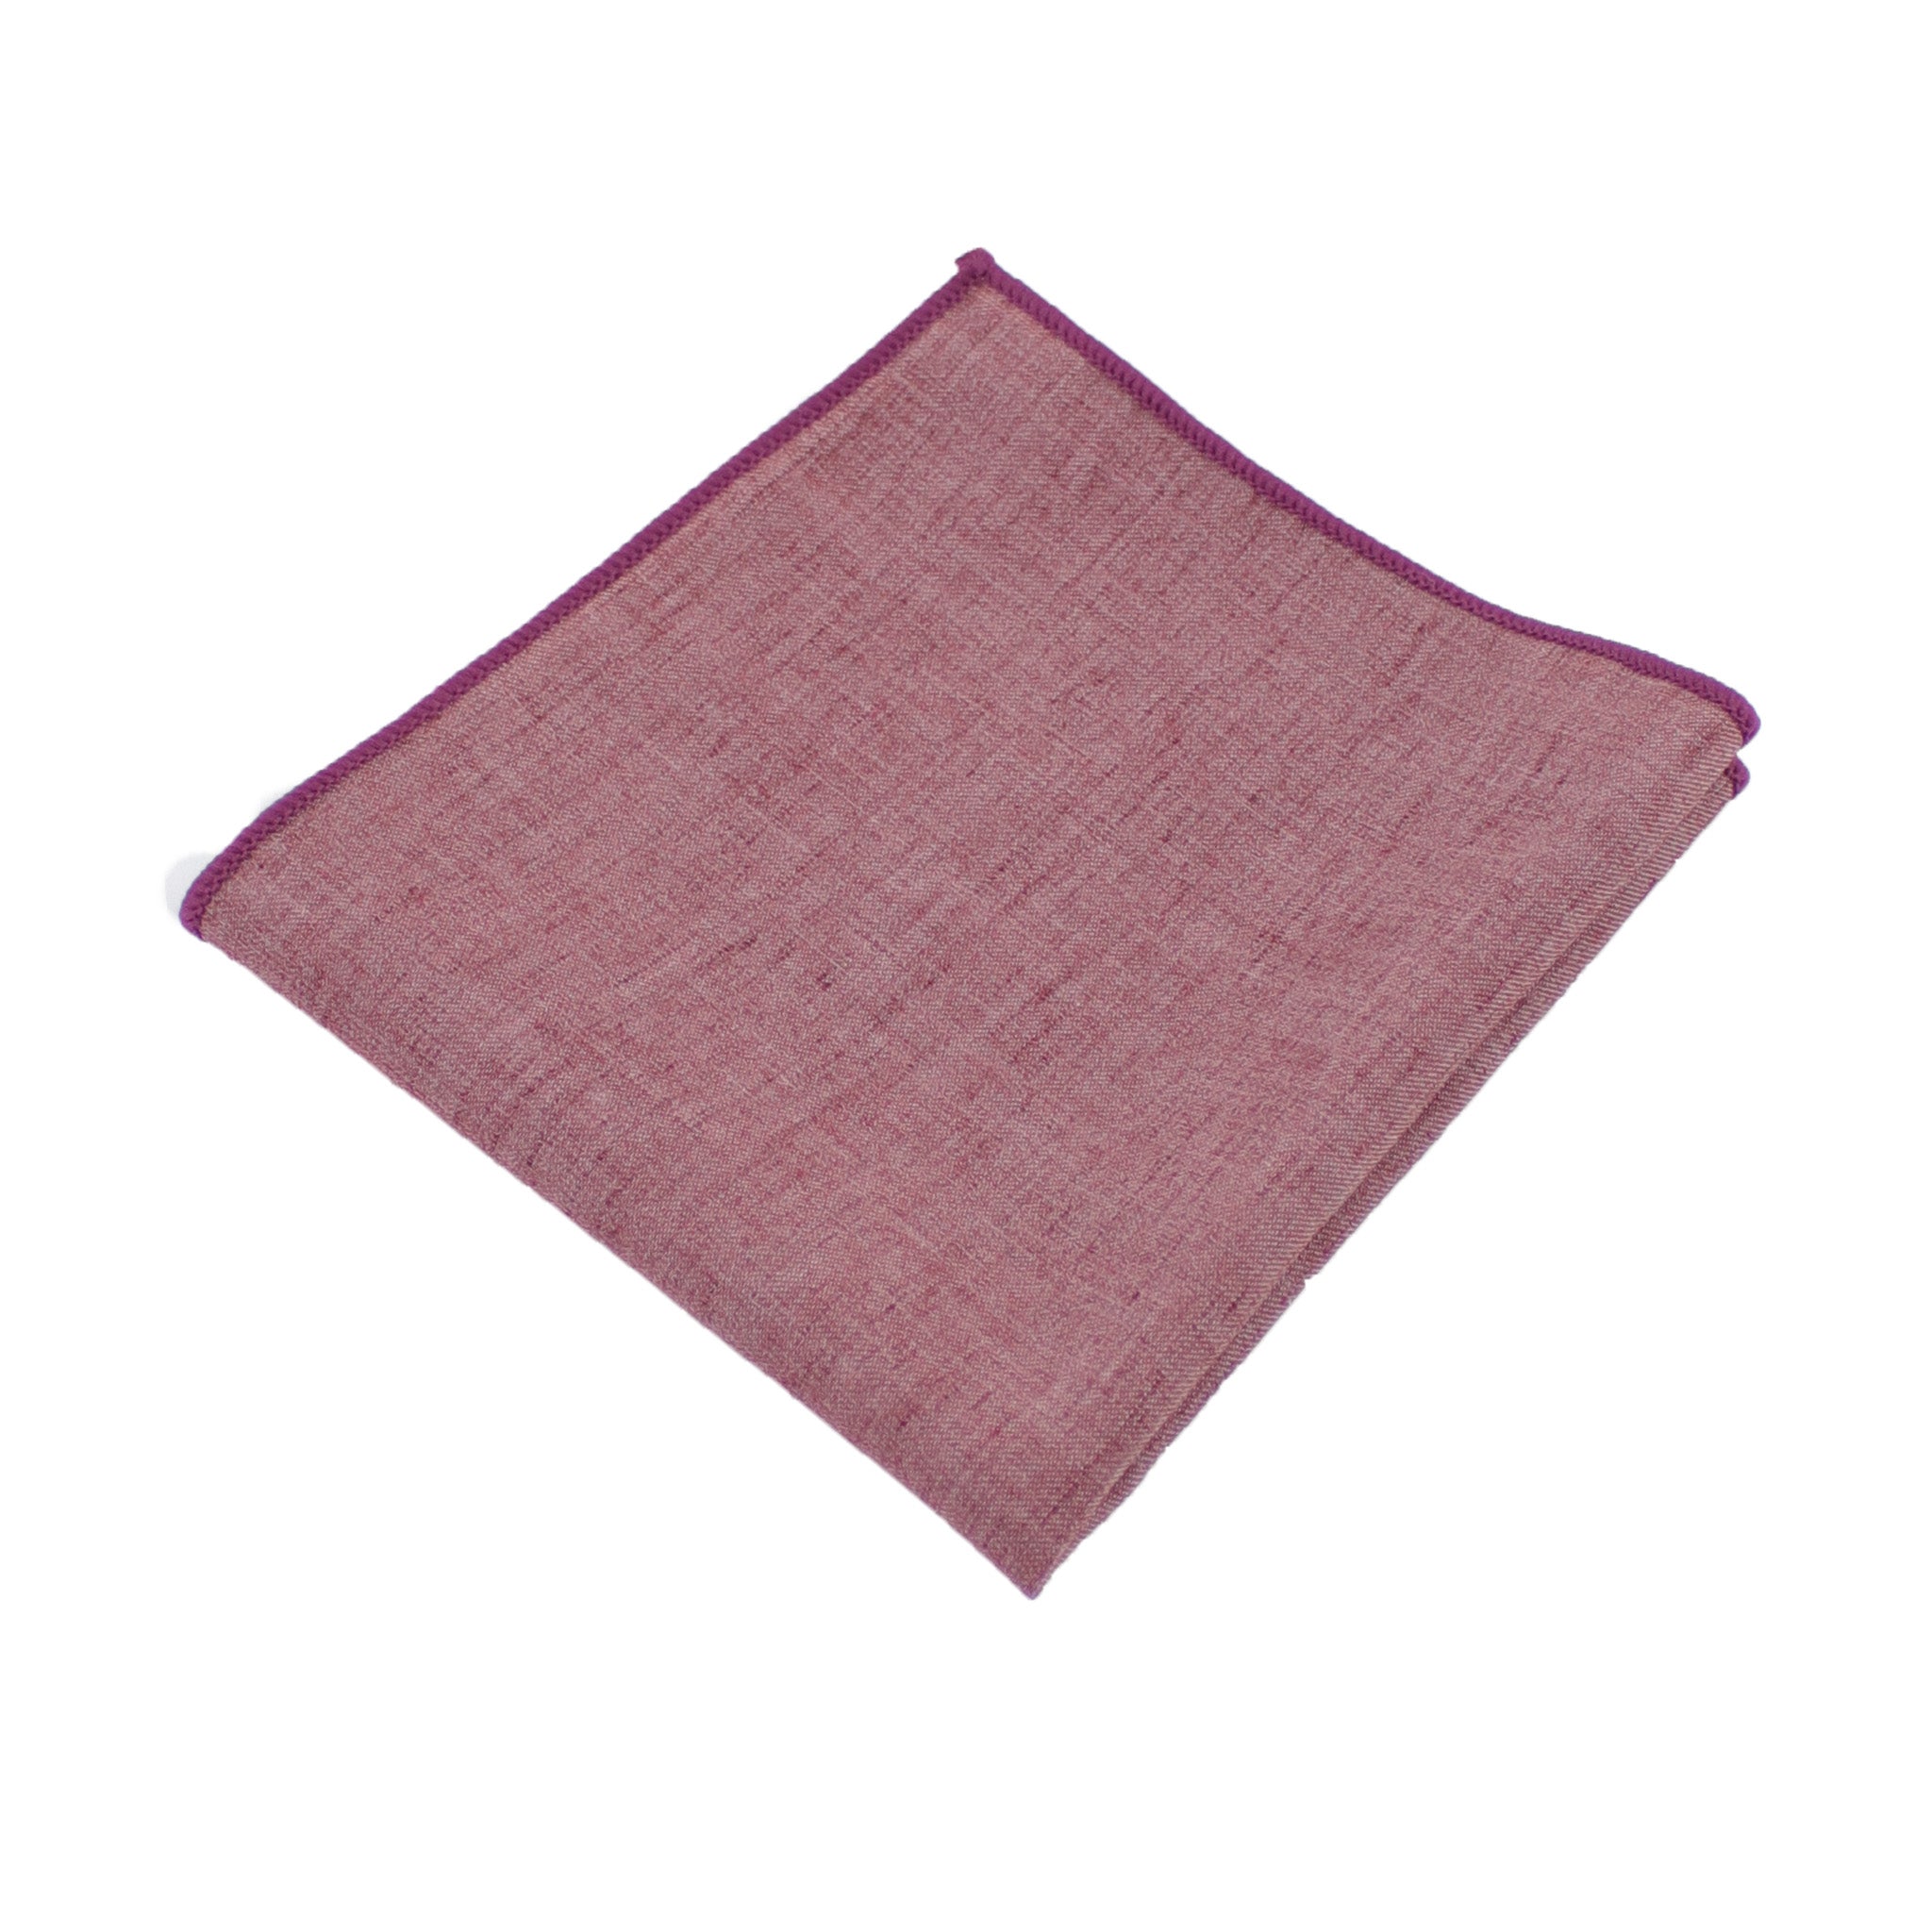 Lightweight Red Pocket Square from DIBI